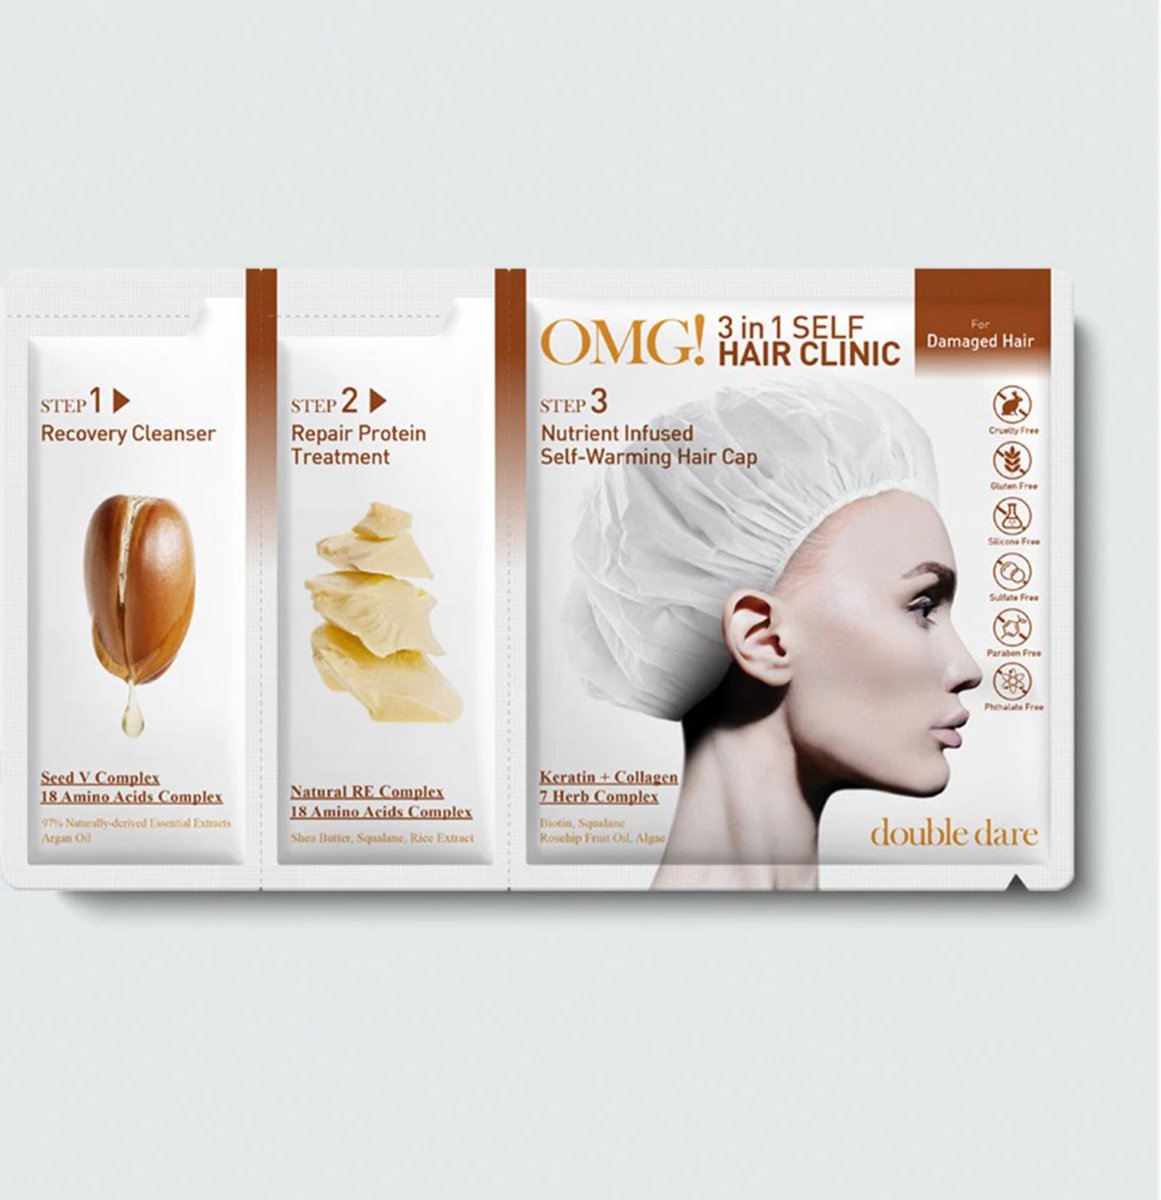 Double Dare Masker OMG! Spa 3 in 1 Self Hair Clinic-For Damaged Hair